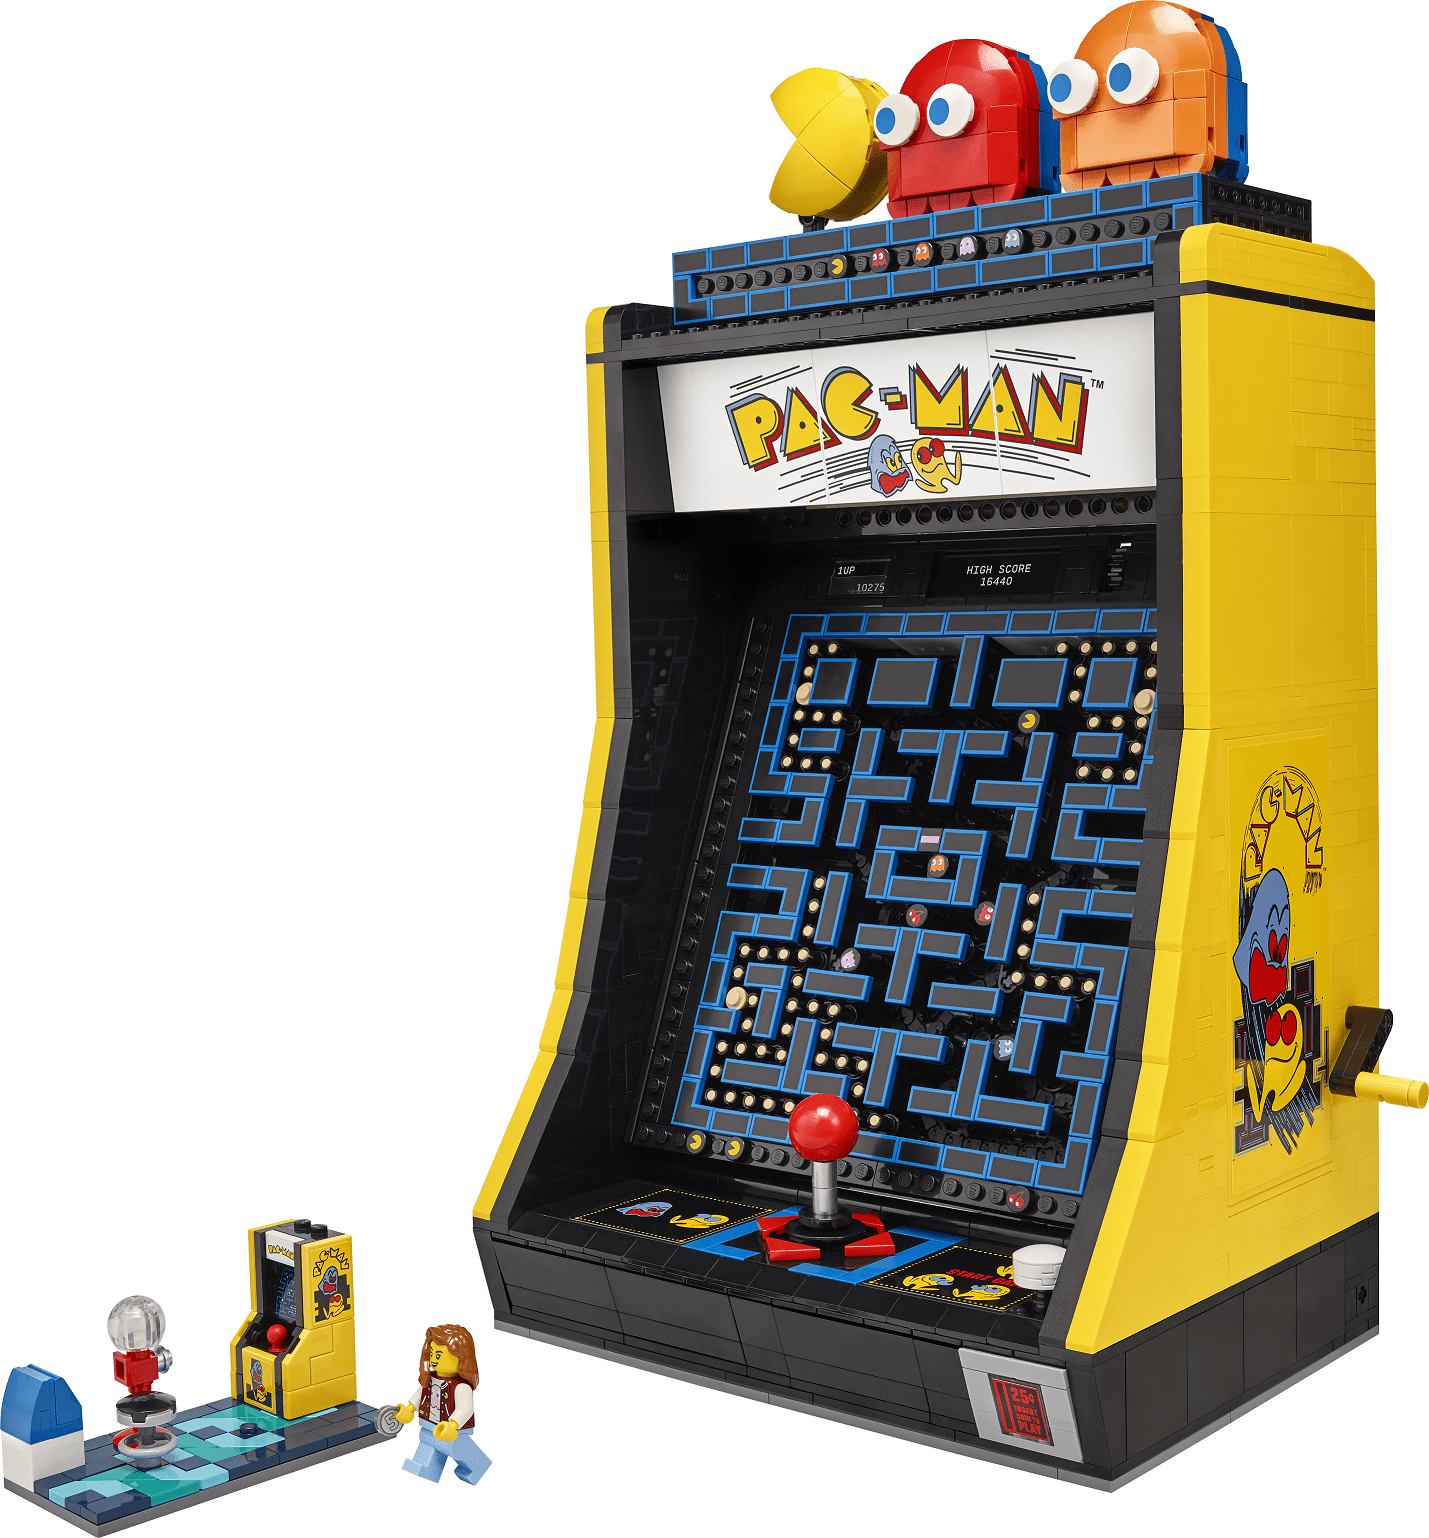 The new LEGO cabinet will let us play PAC-MAN